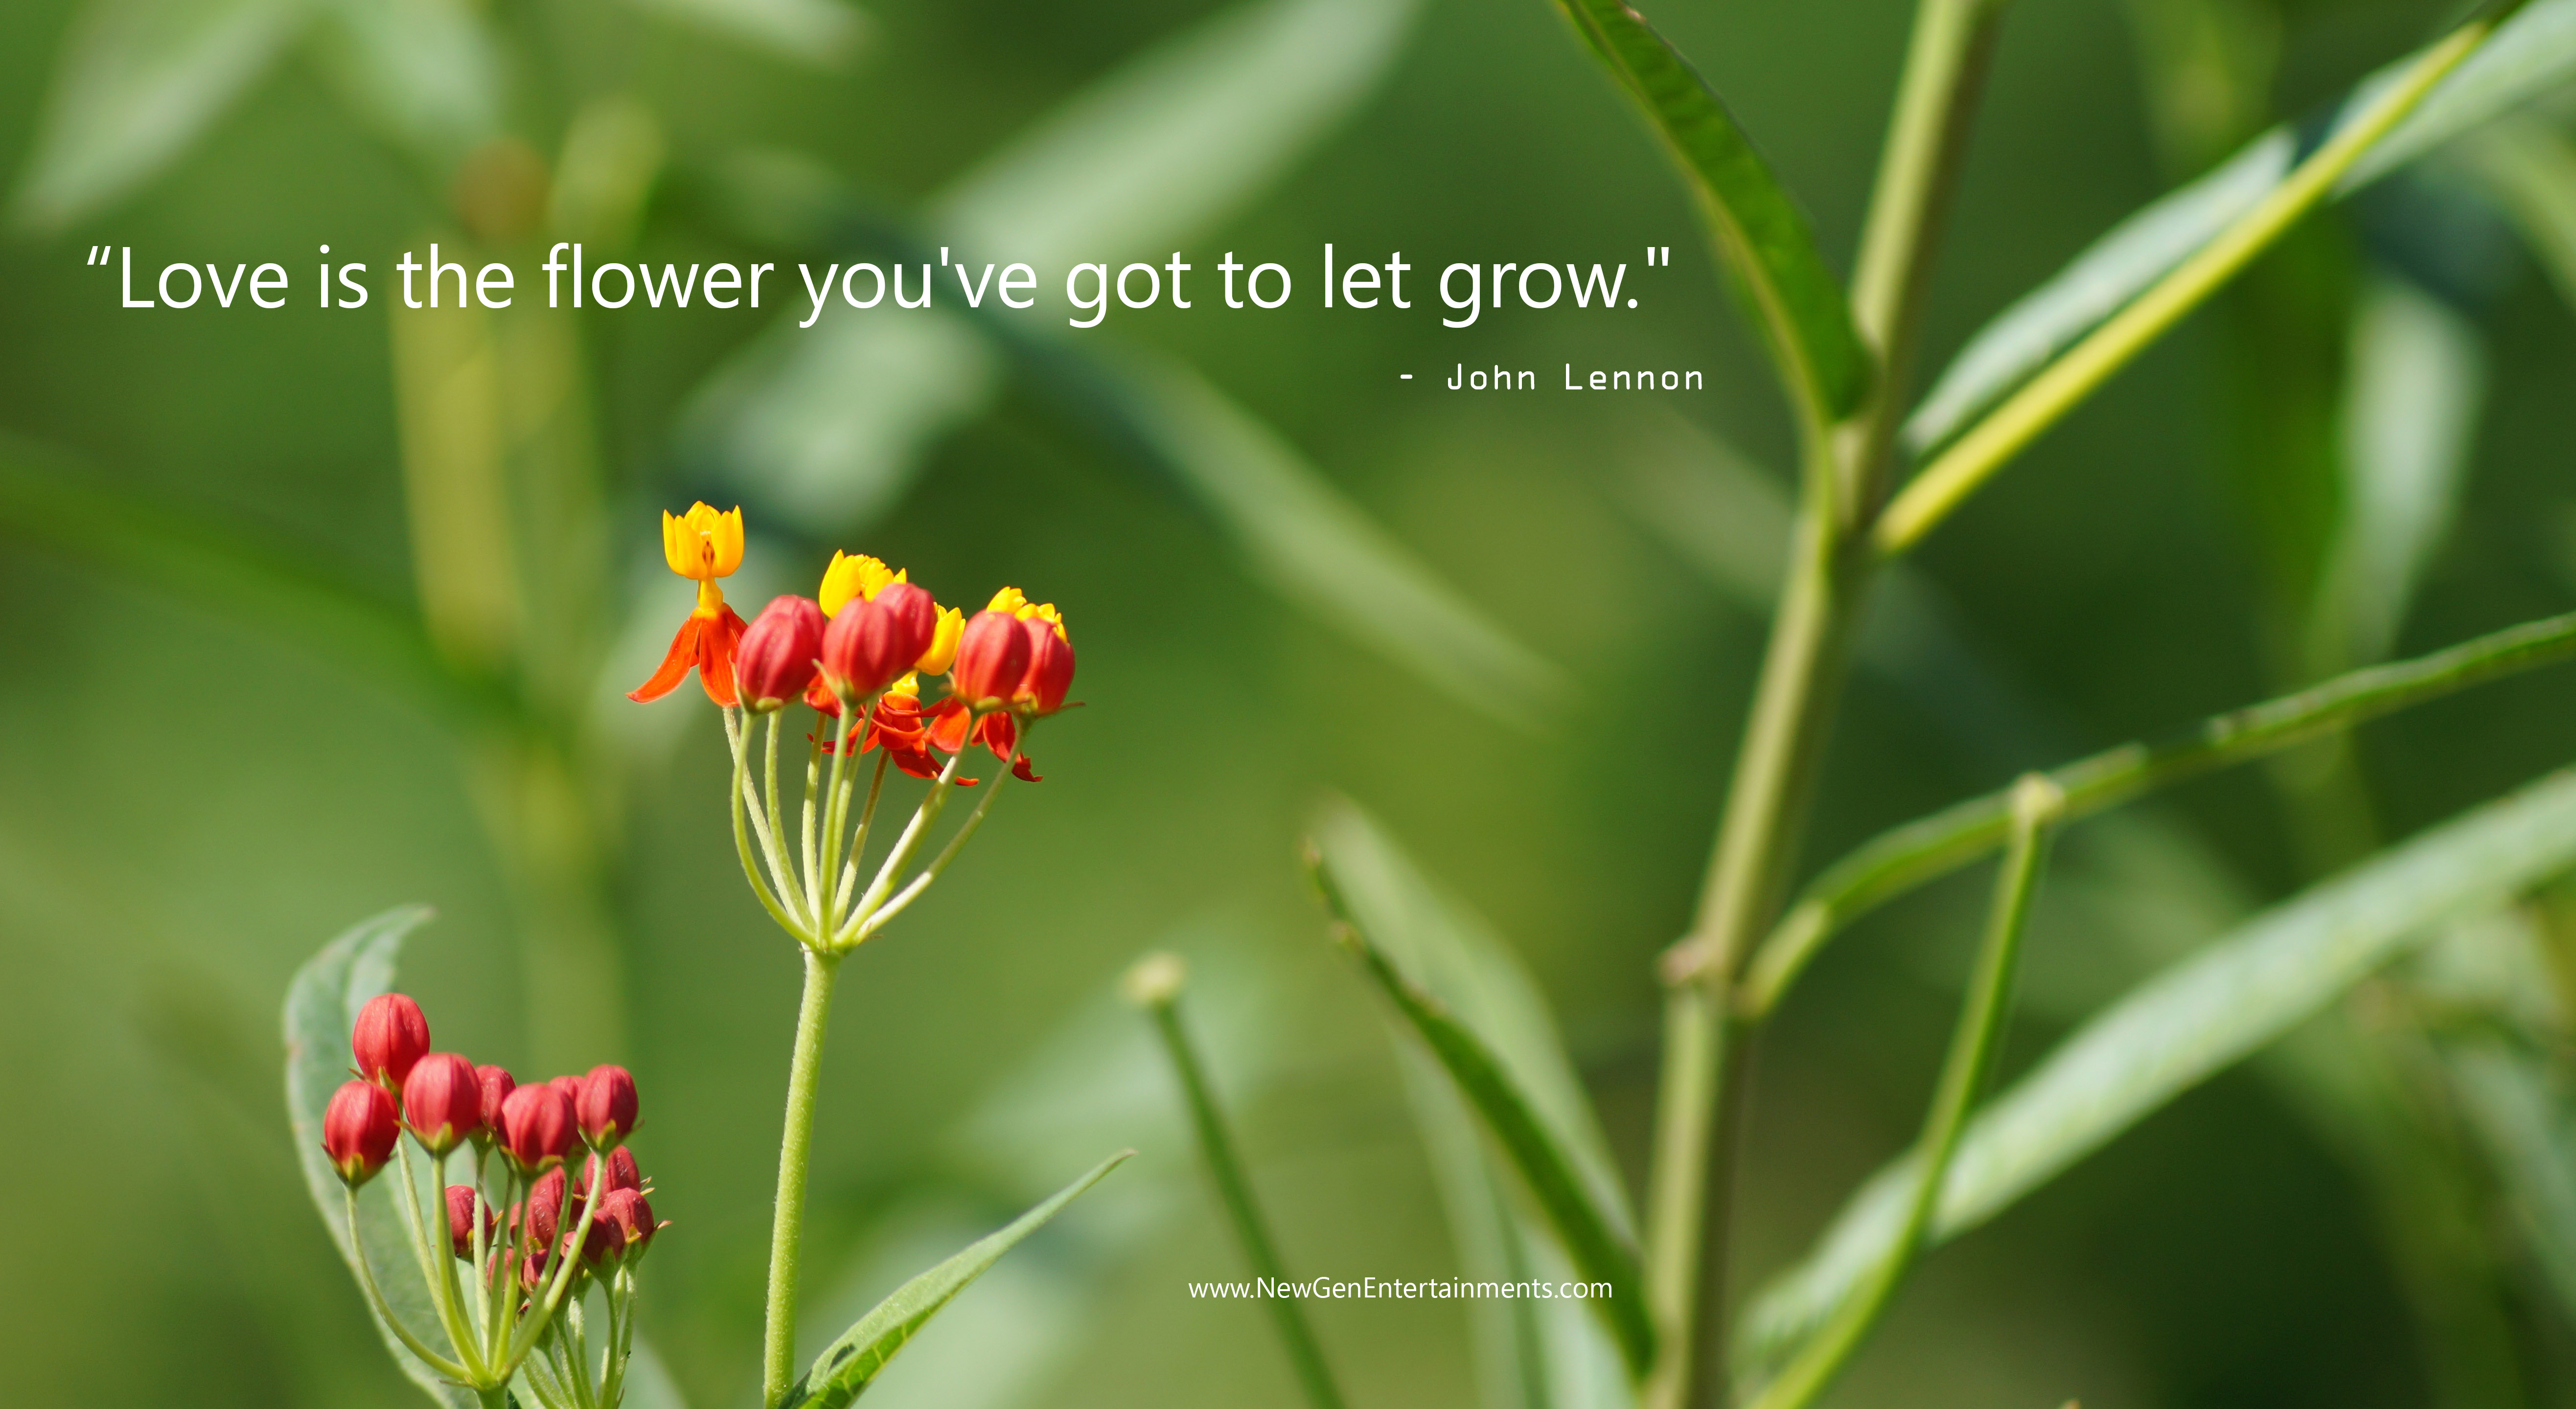 Love is the flower you've got to let grow